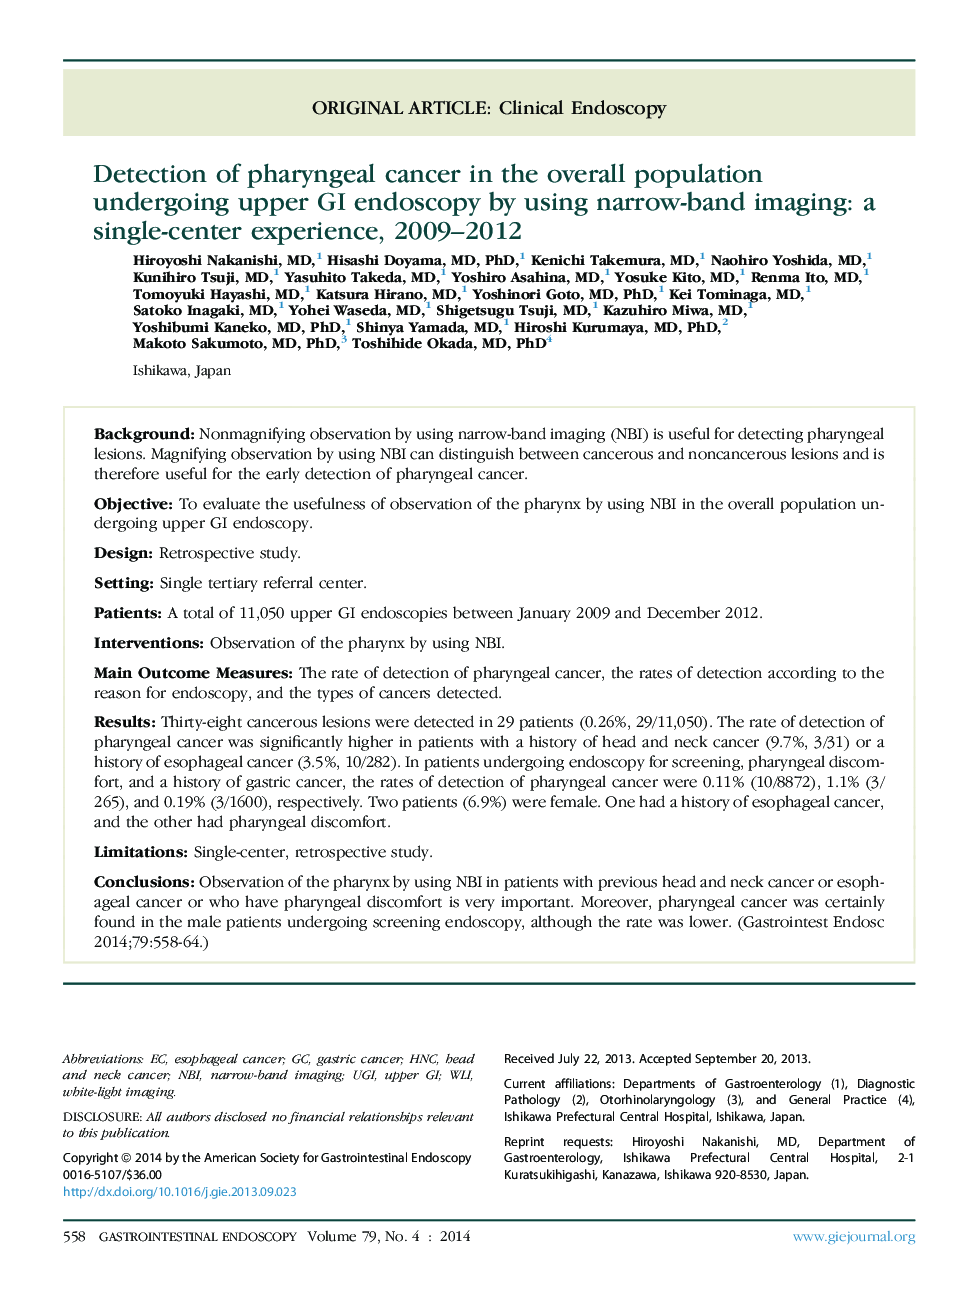 Detection of pharyngeal cancer in the overall population undergoing upper GI endoscopy by using narrow-band imaging: a single-center experience, 2009–2012 